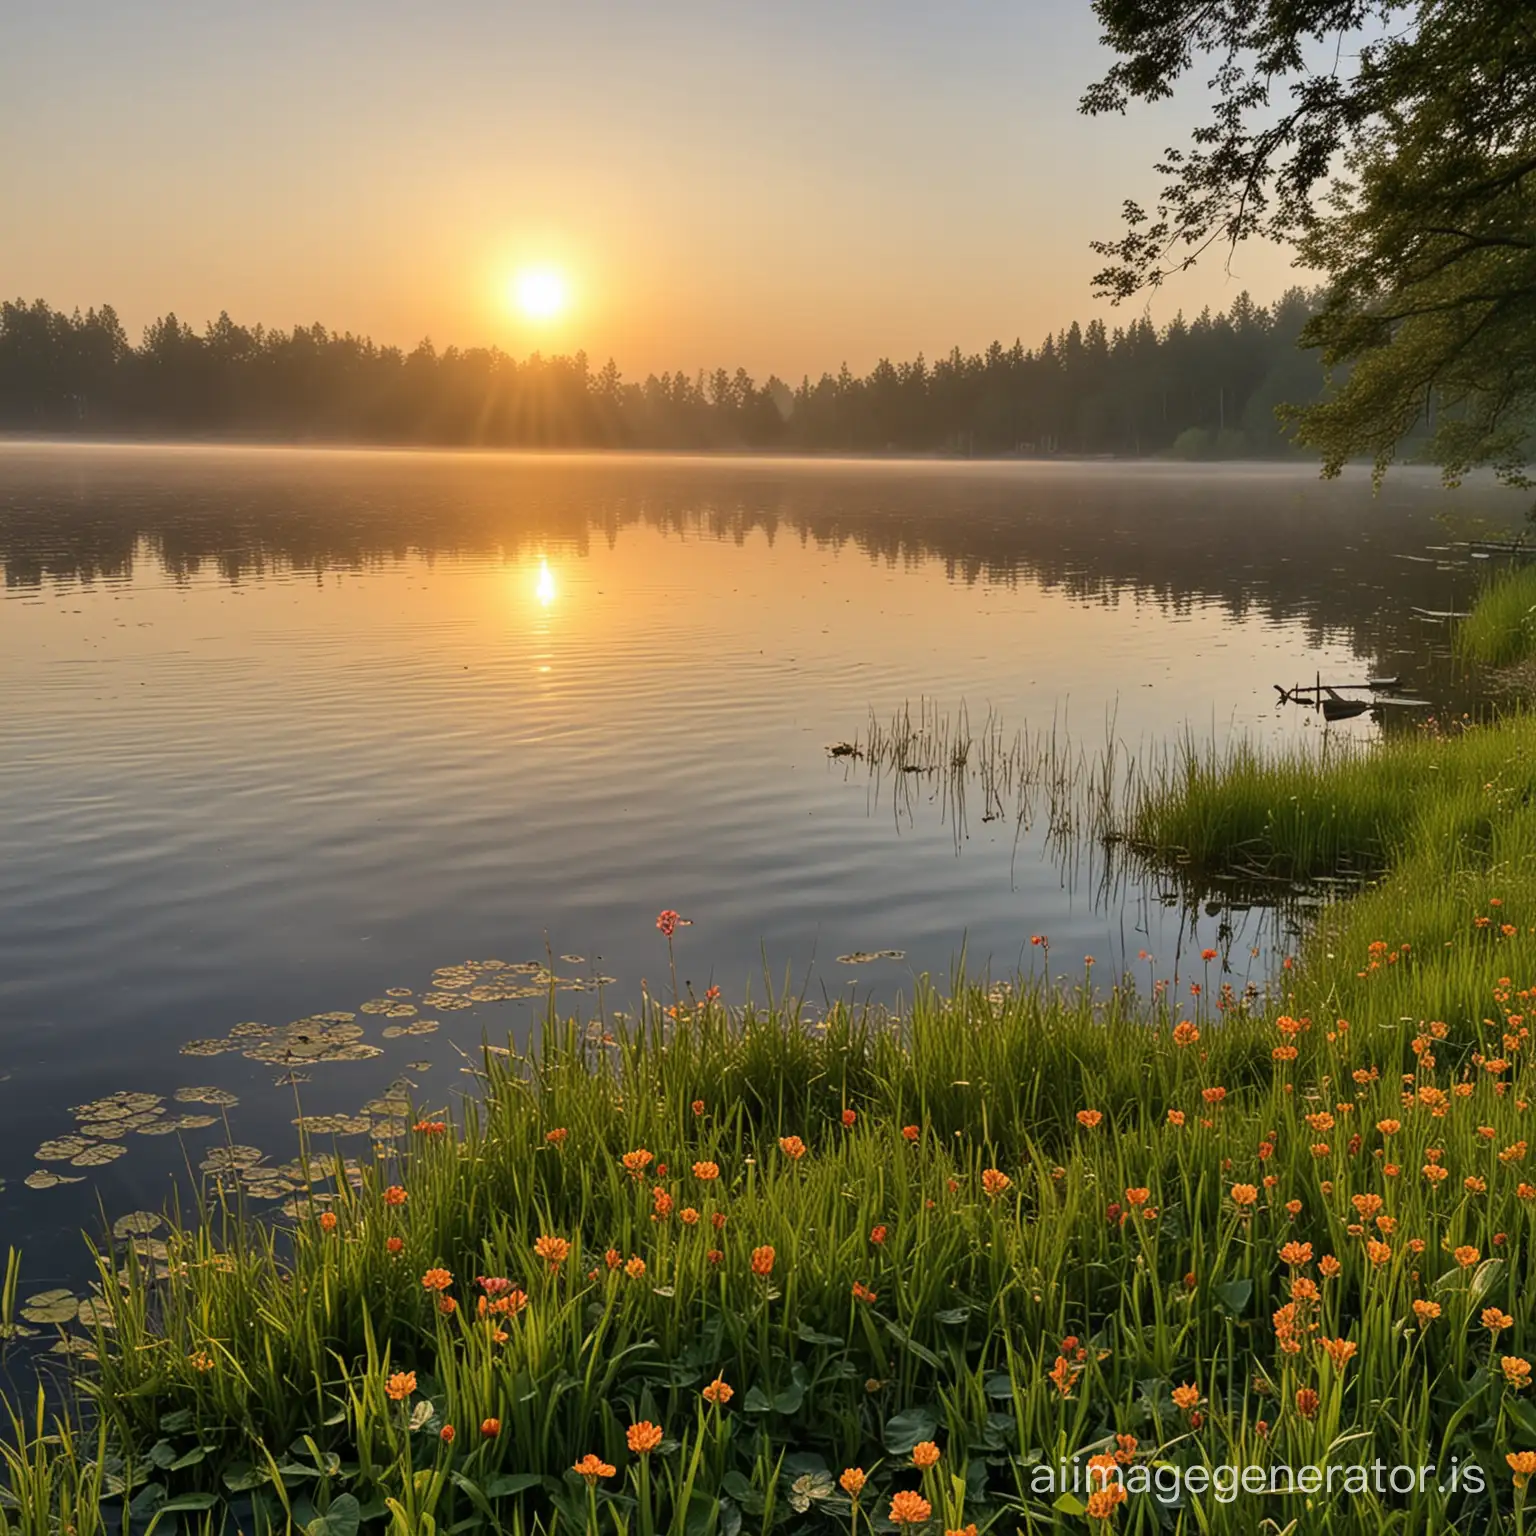 the morning scene, will have the sun coming up at dawn, big lake, flowers, green grass surrounding the large lake, lake water coming towars the camera, big area for lake water